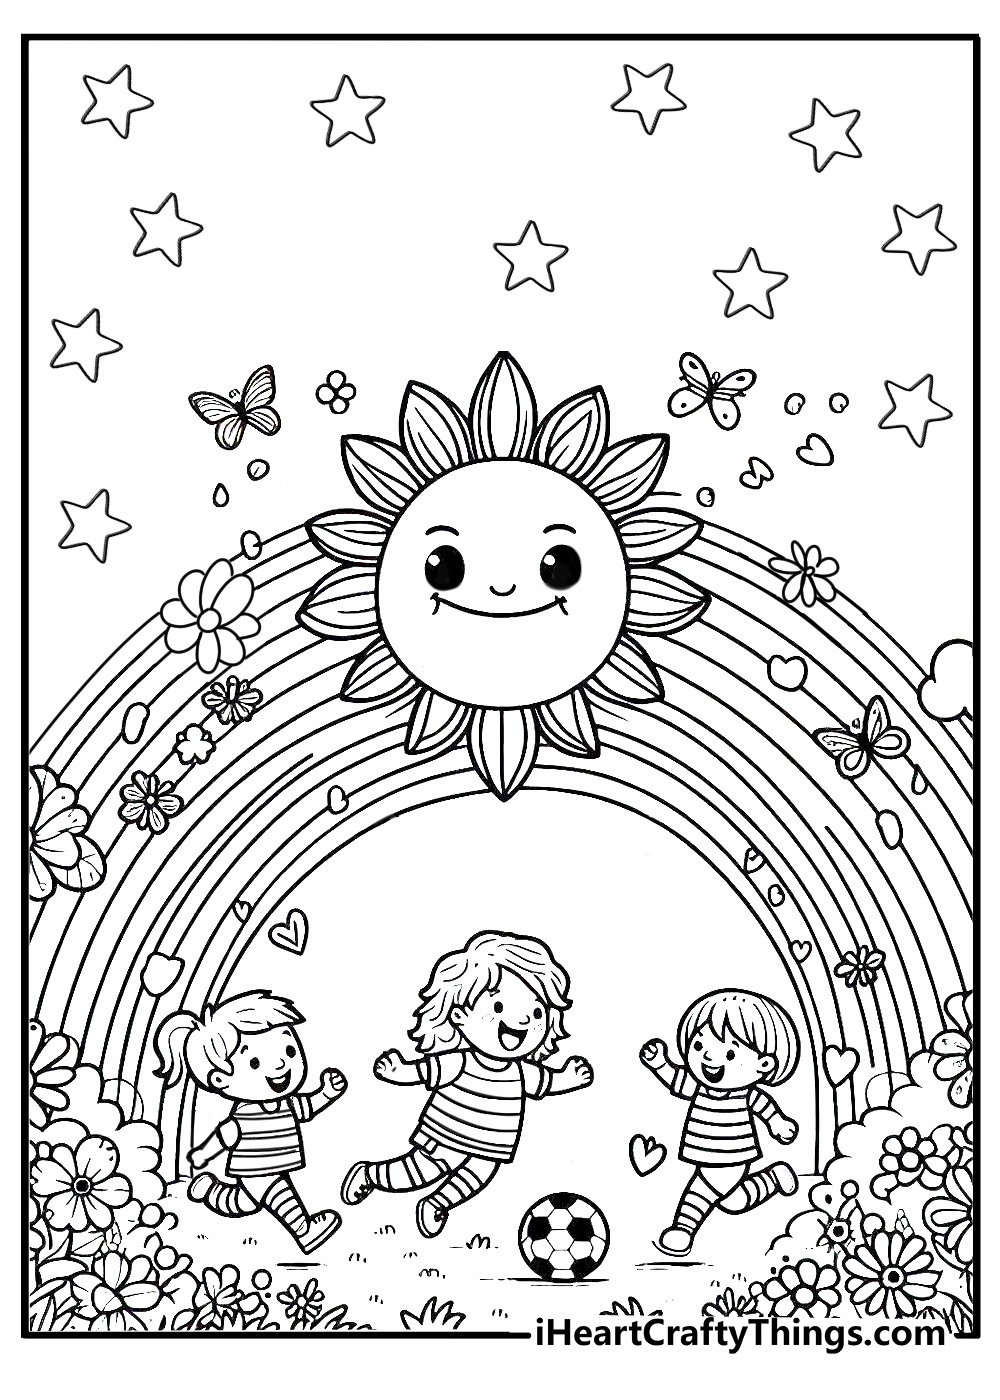 Super happy and exciting coloring page